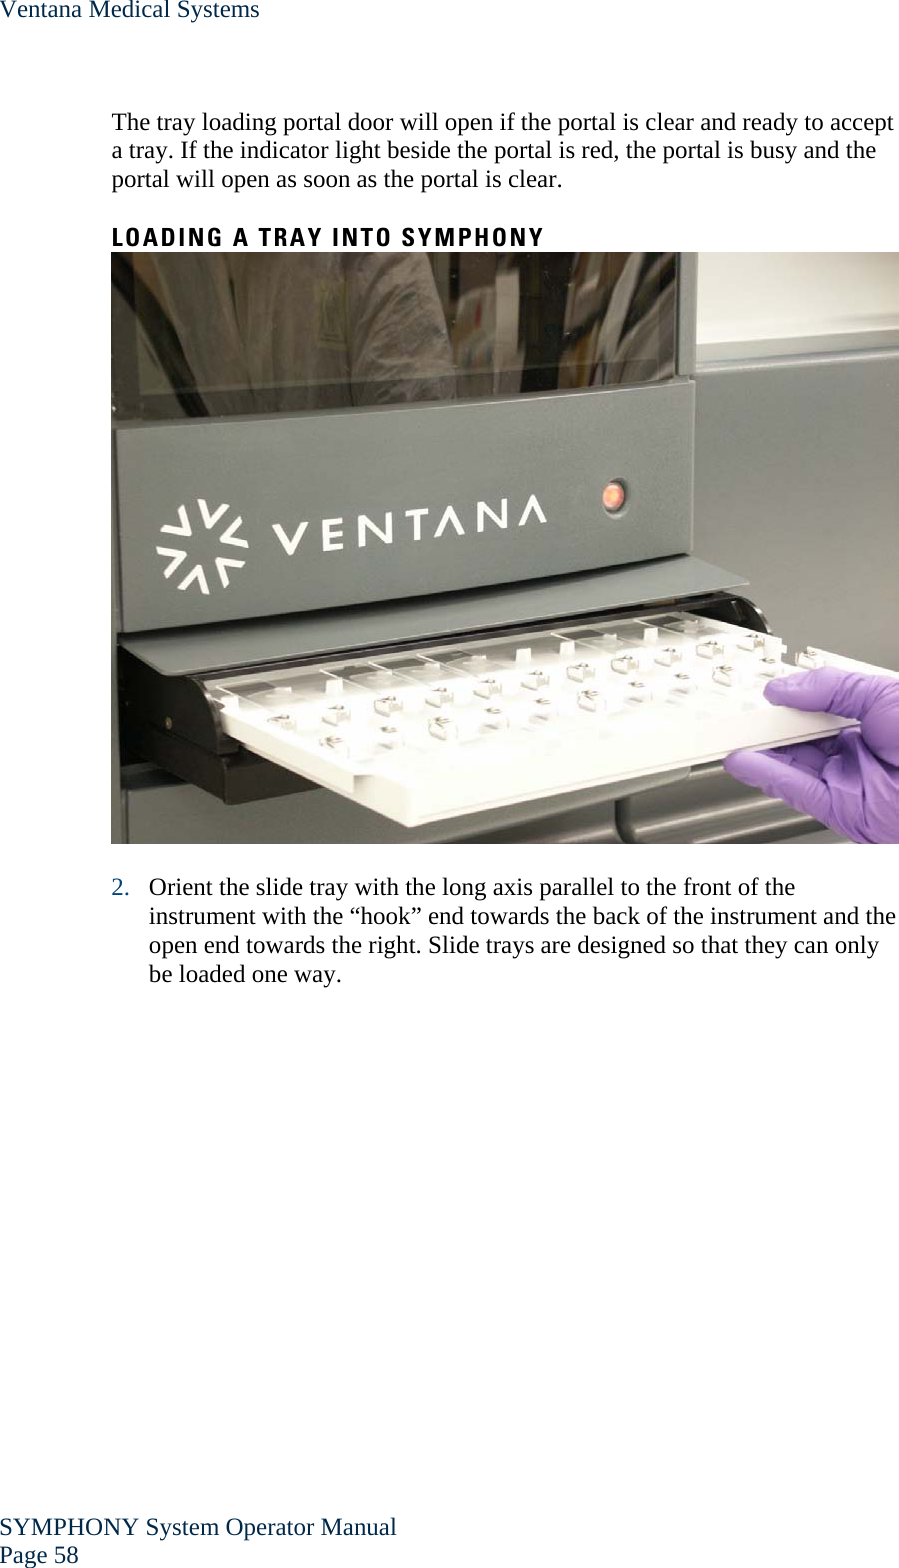 Ventana Medical Systems SYMPHONY System Operator Manual Page 58    The tray loading portal door will open if the portal is clear and ready to accept a tray. If the indicator light beside the portal is red, the portal is busy and the portal will open as soon as the portal is clear.  LOADING A TRAY INTO SYMPHONY   2. Orient the slide tray with the long axis parallel to the front of the instrument with the “hook” end towards the back of the instrument and the open end towards the right. Slide trays are designed so that they can only be loaded one way.  